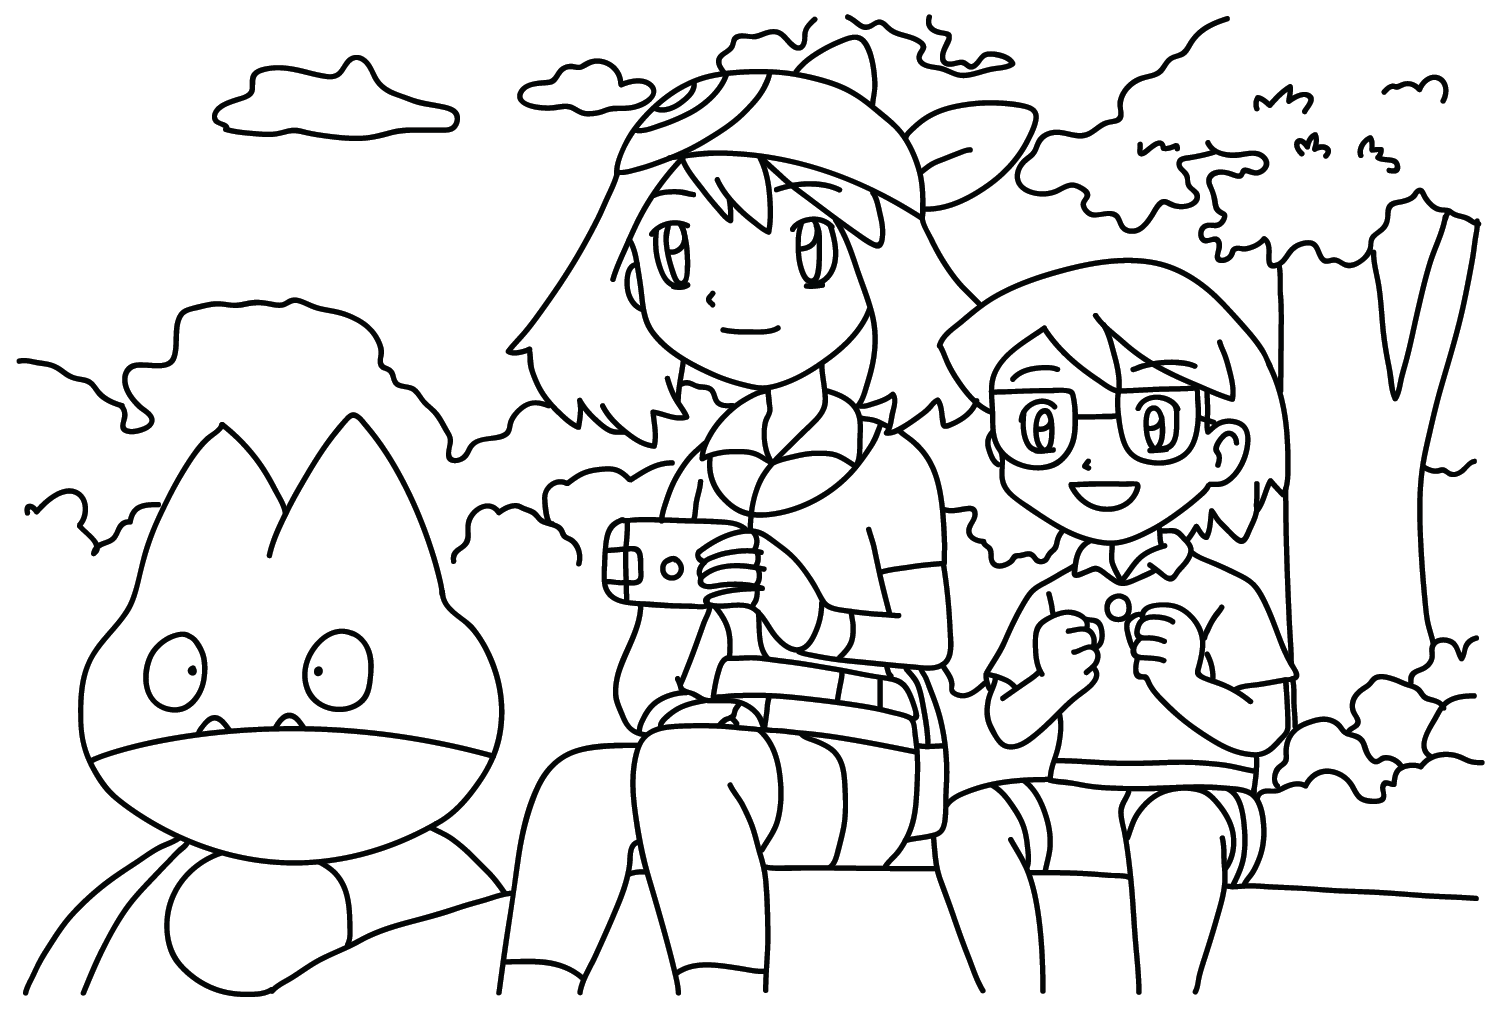 Max, May Pokemon to Color from May Pokemon